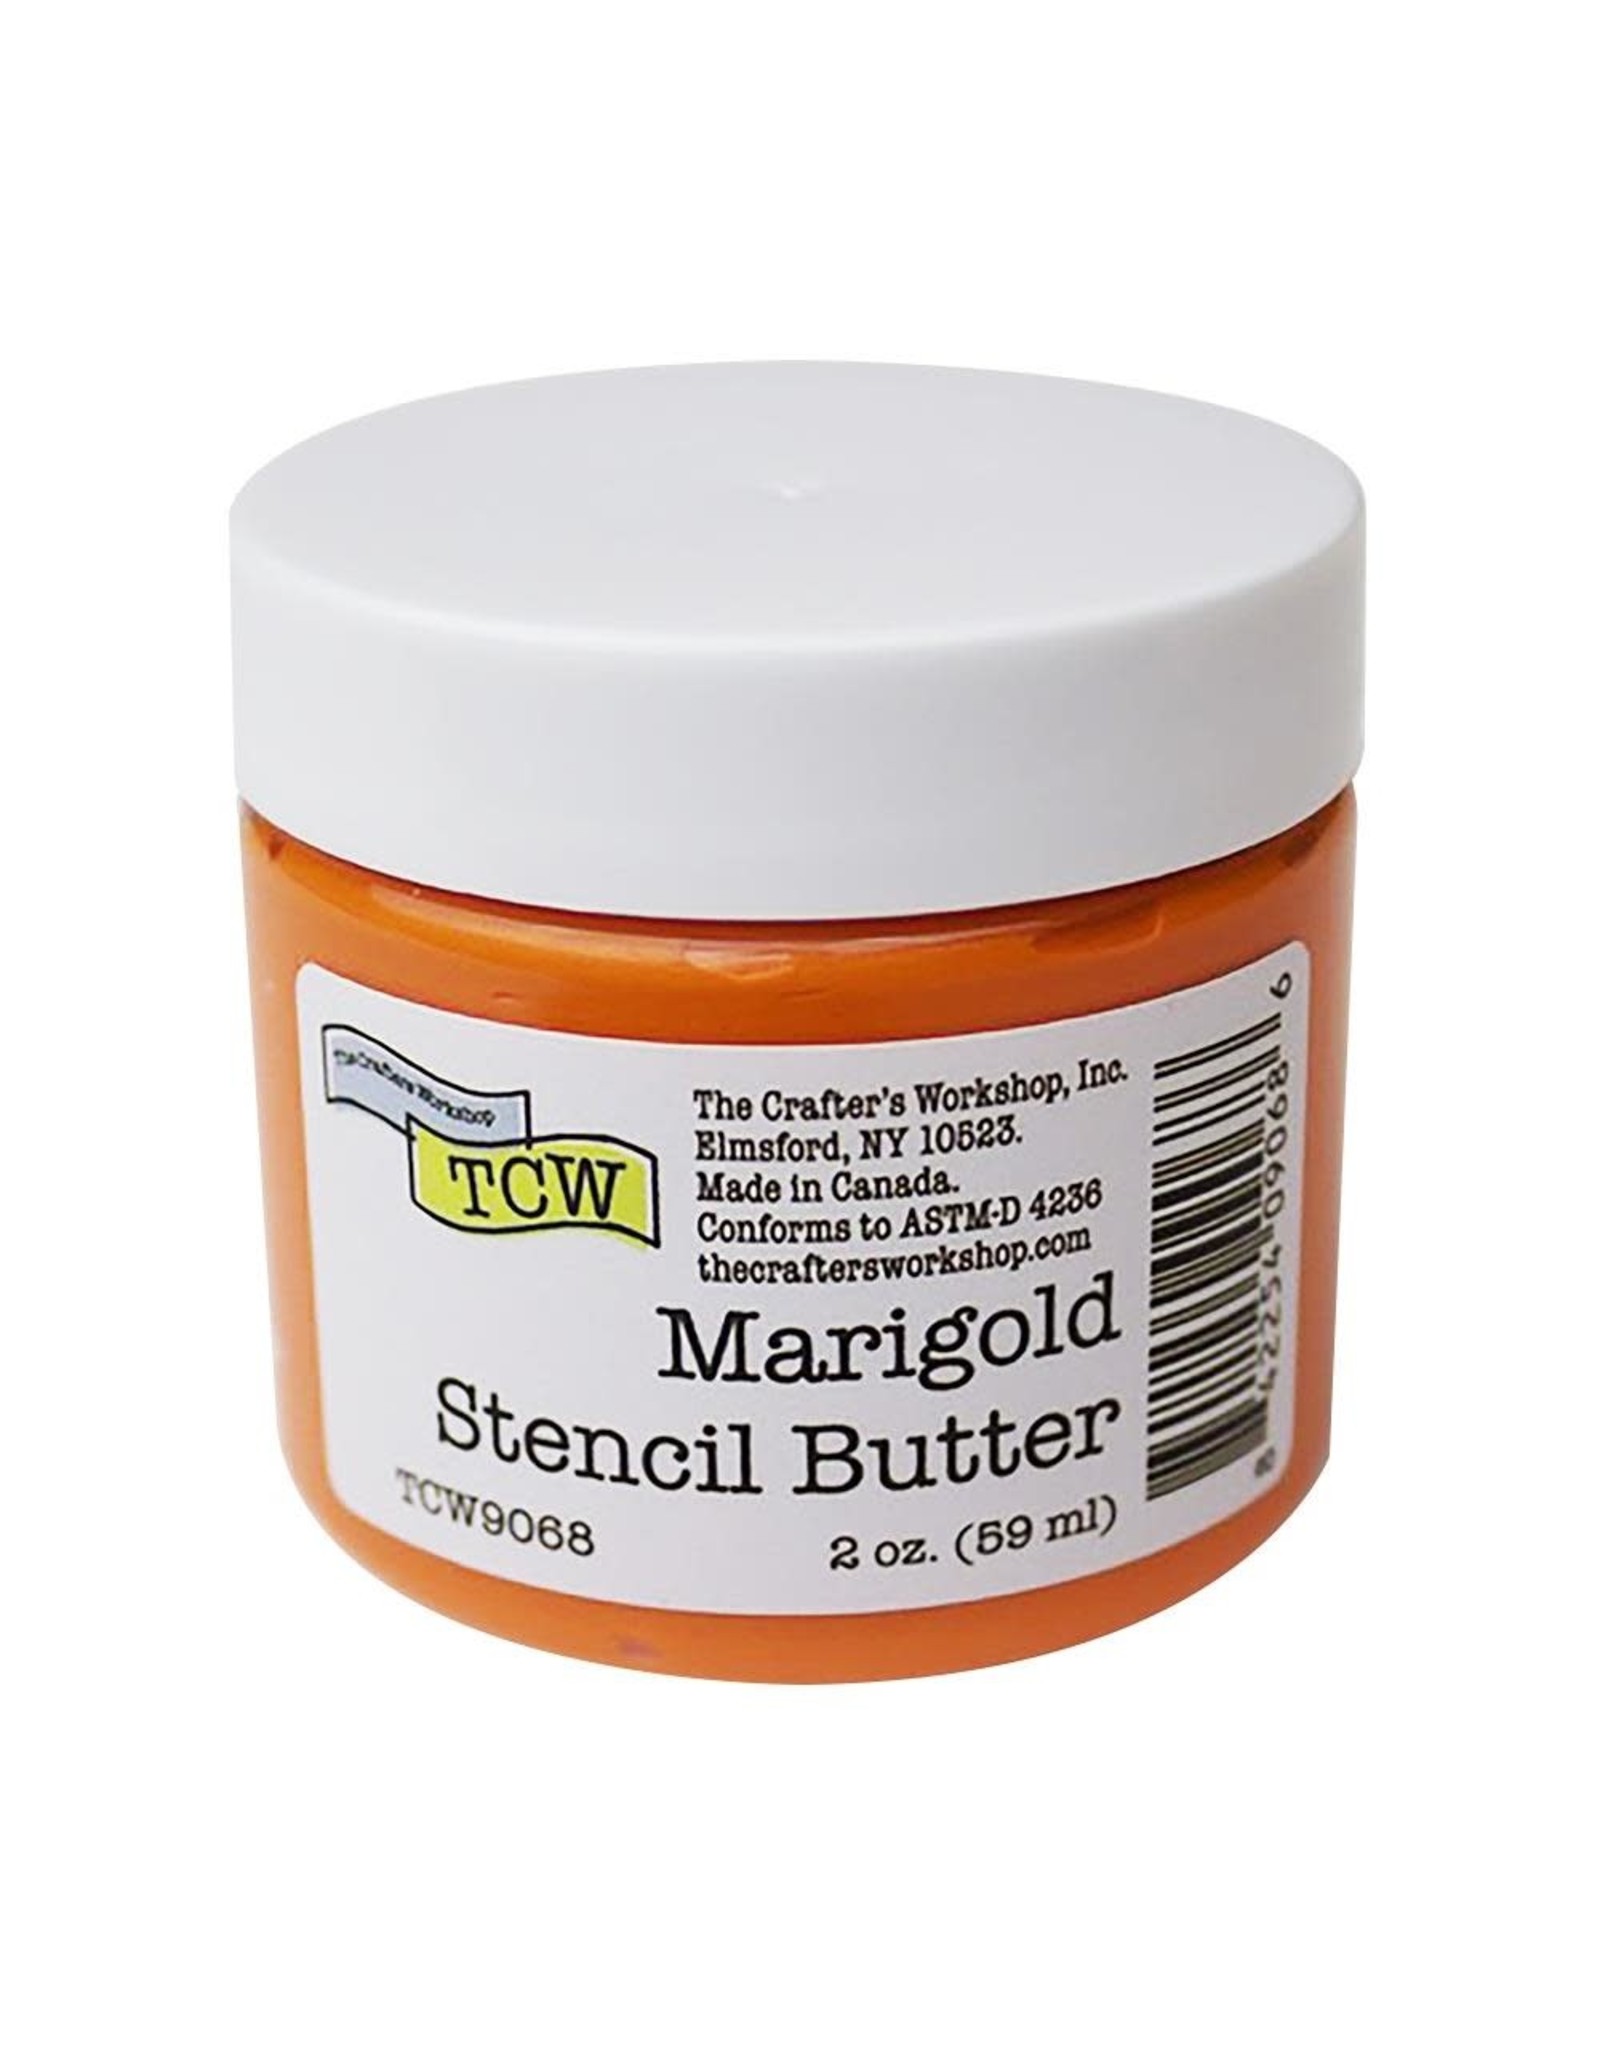 THE CRAFTERS WORKSHOP Stencil Butter 2 oz. - Marigold